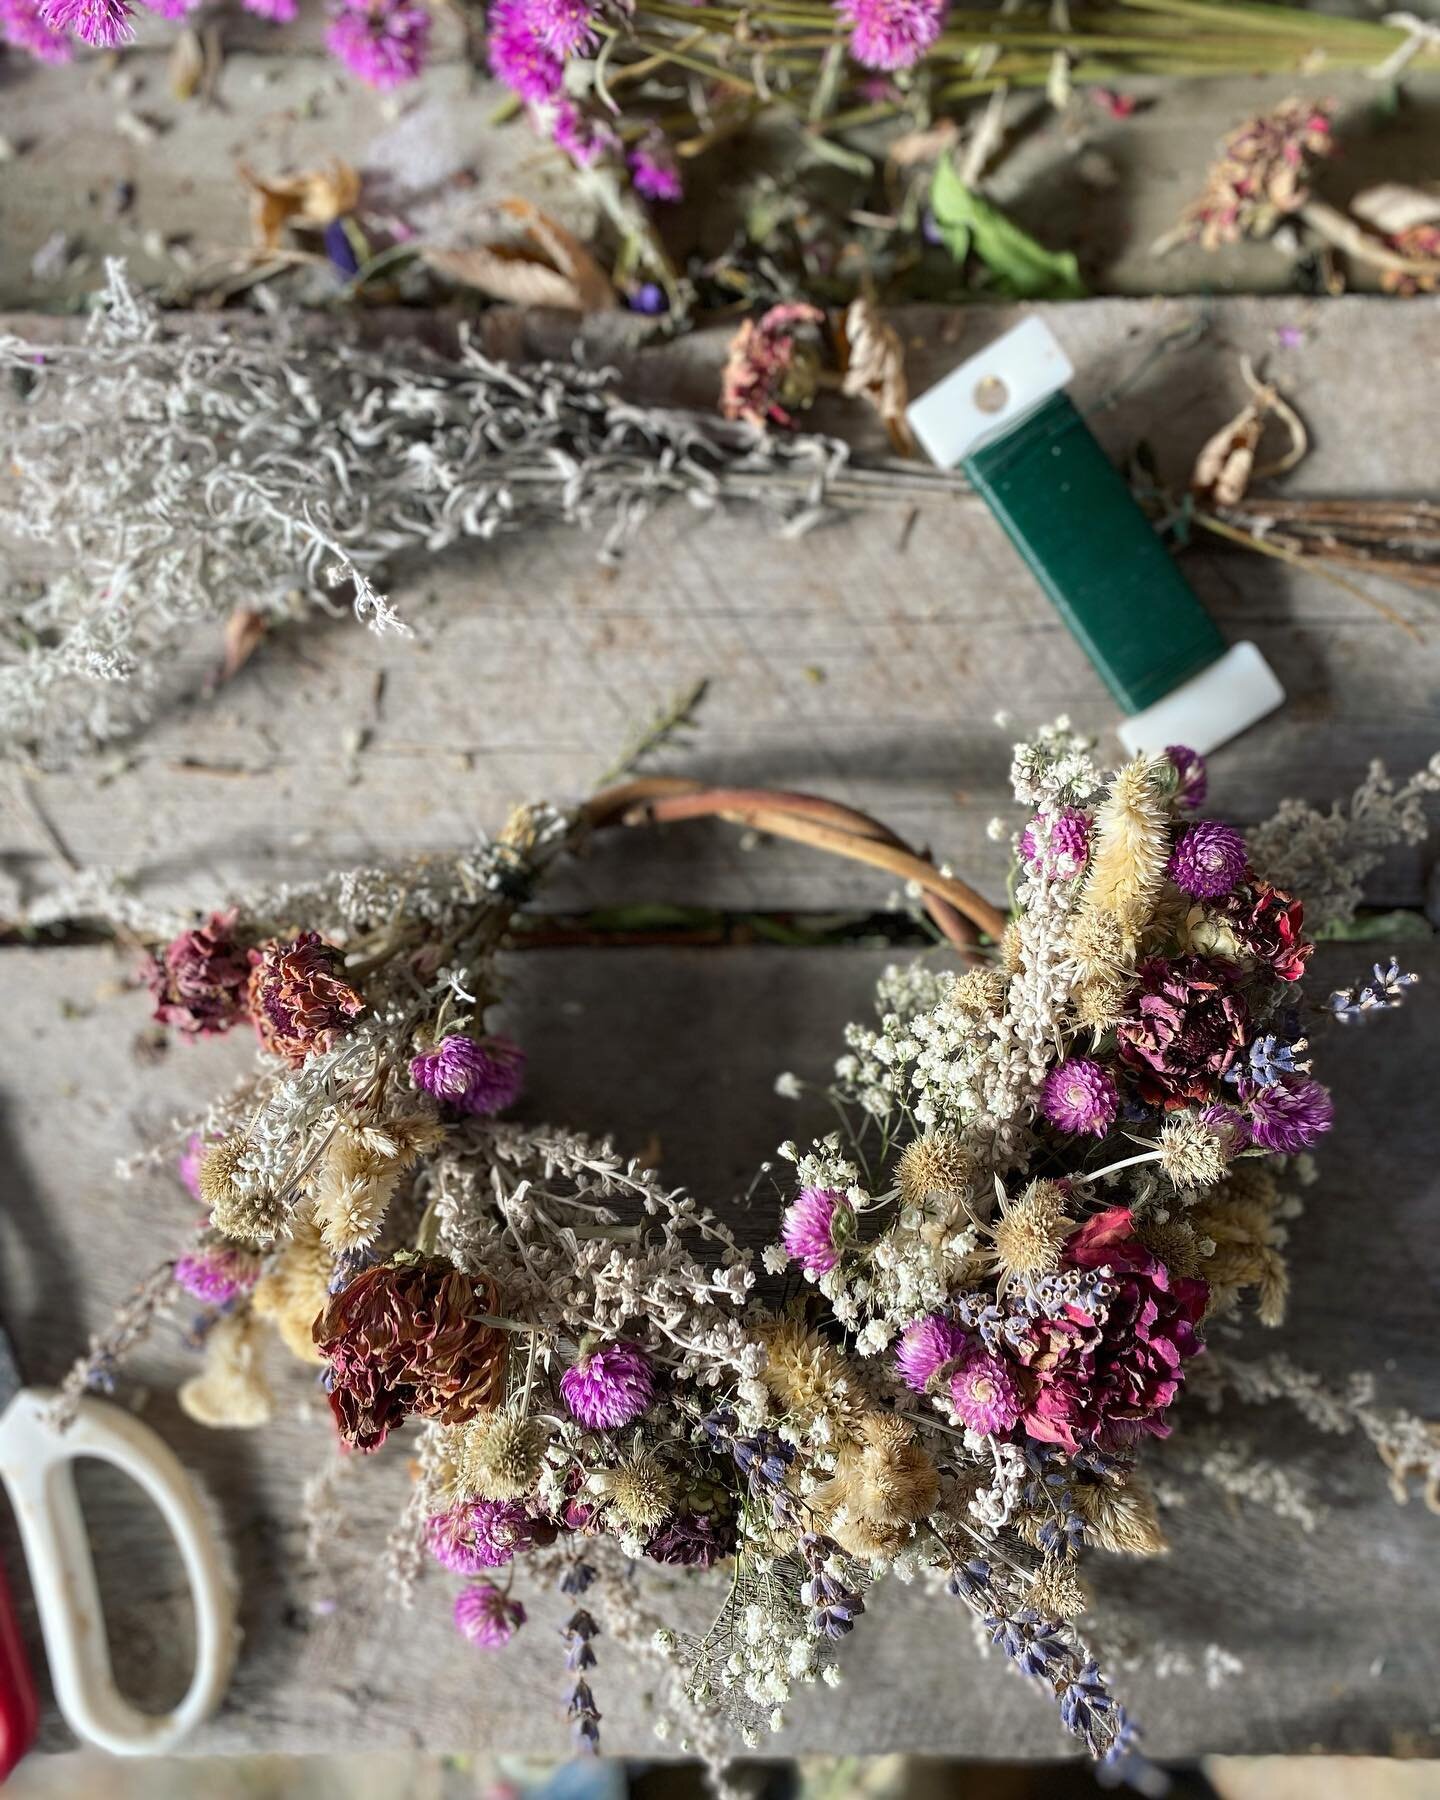 Switching gears&hellip;✨Spending some time playing with the color and texture from the summer. Dried flower wreaths and evergreen wreaths are making their way onto the website and will be available at holiday markets in December. Stay tuned! 🌾🌻🍂 #